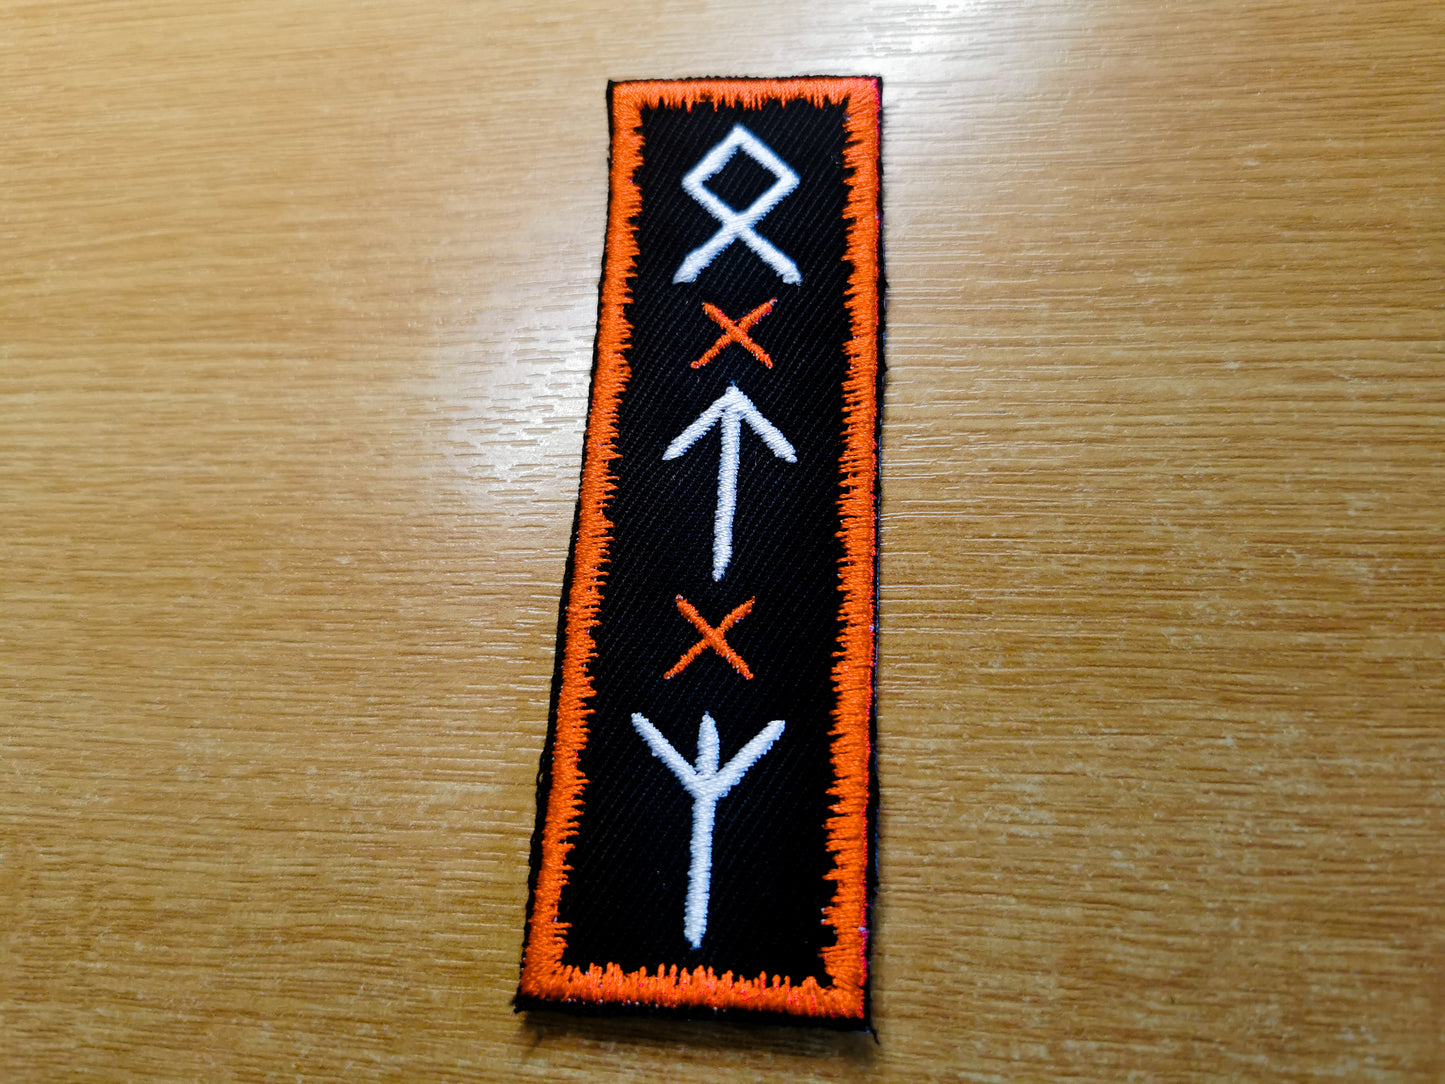 Pumpkin and White Viking Runes Embroidered Patch - Odal, Teiwaz and Algeiz